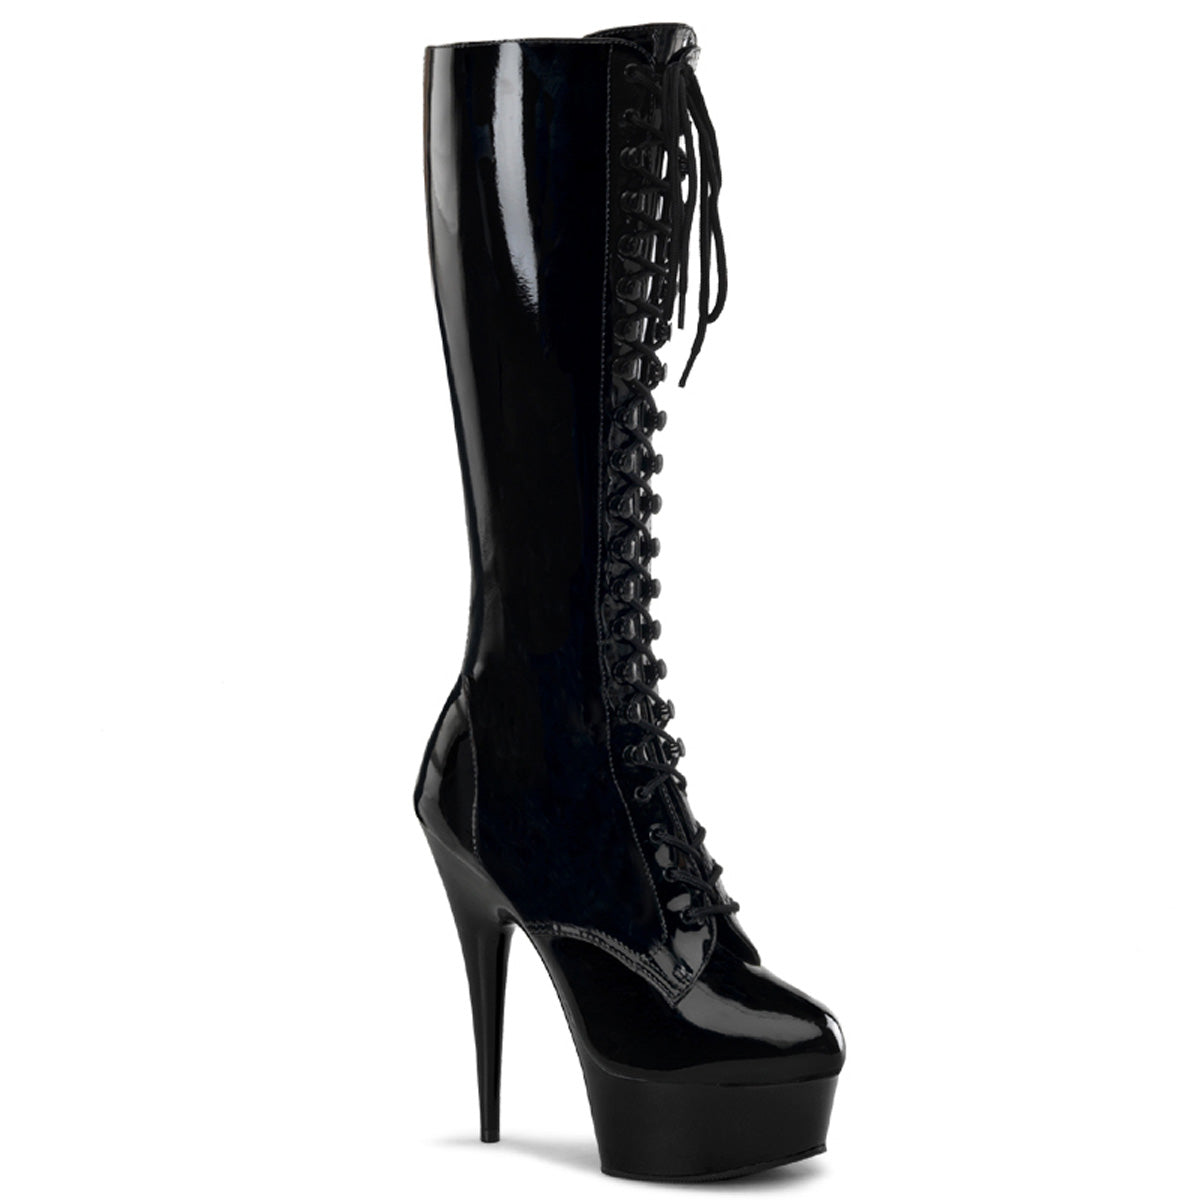 DELIGHT-2023 Knee High Boots